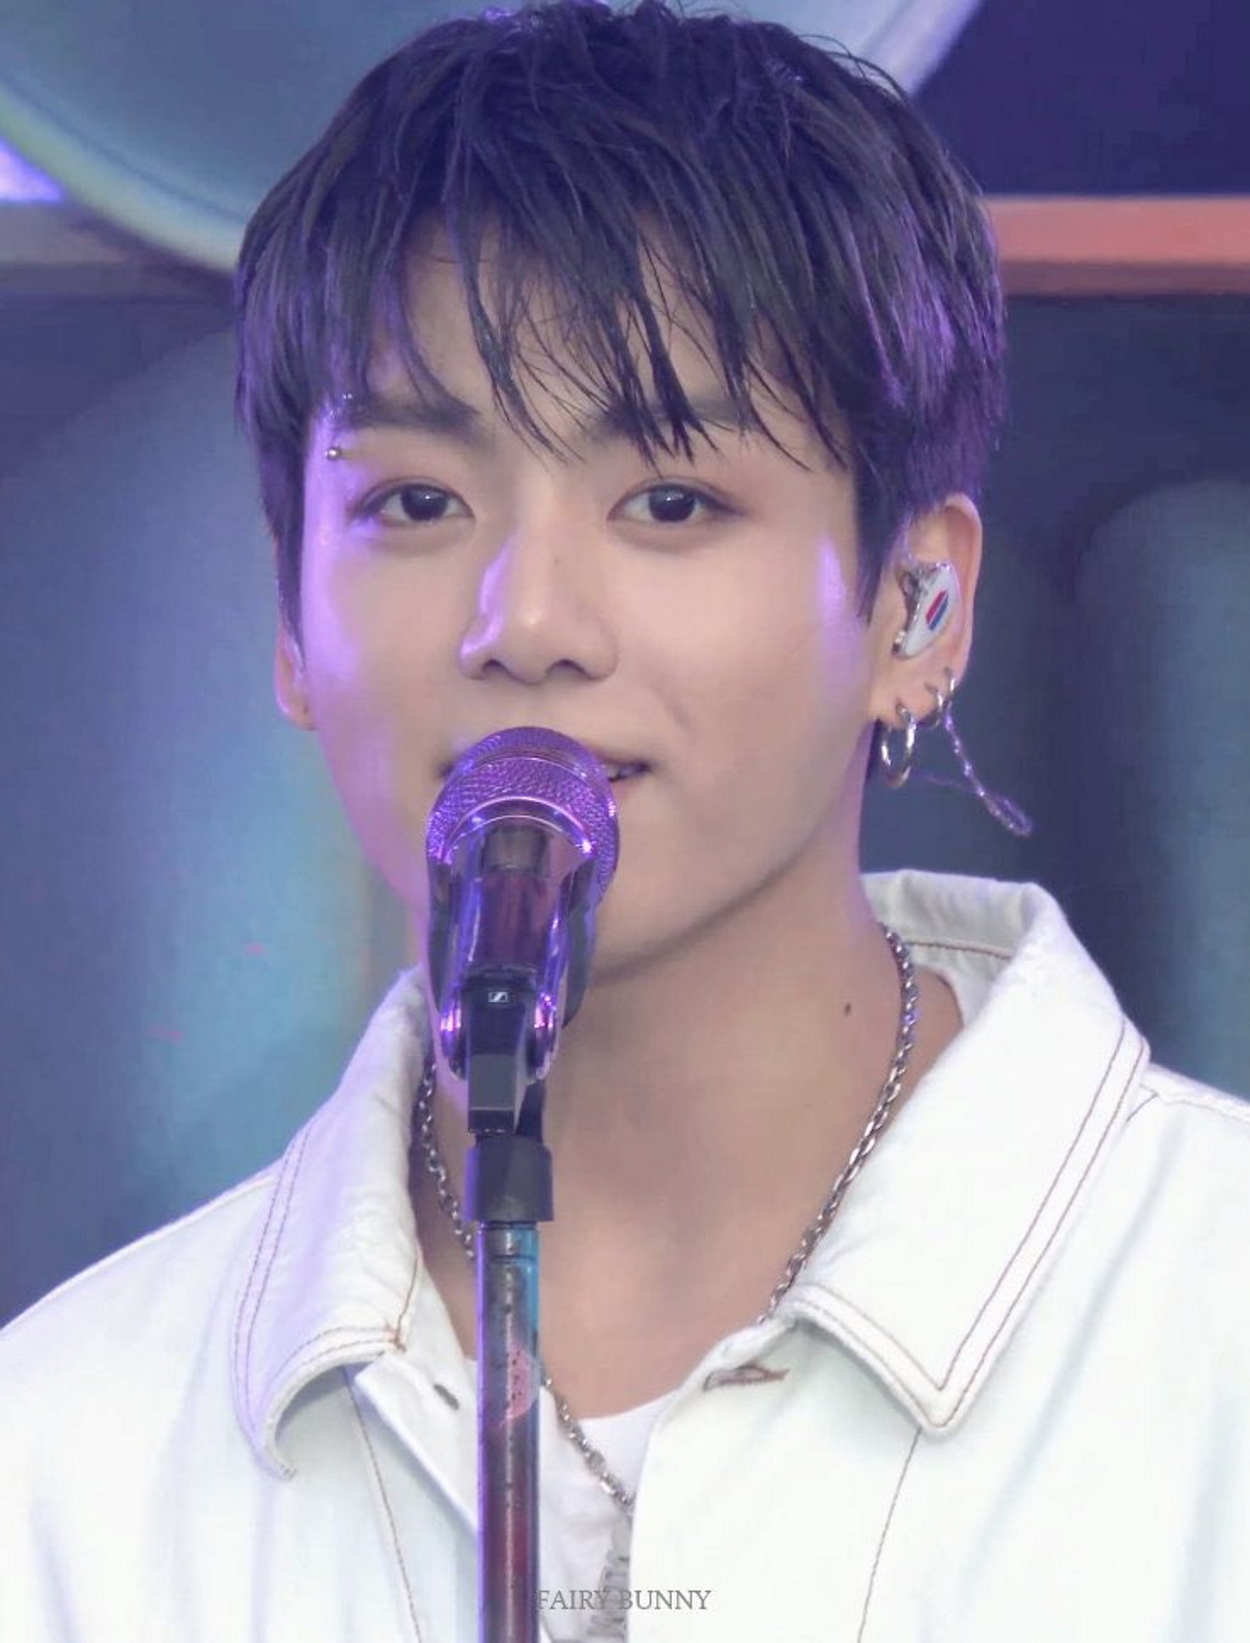 Jungkook Goes Back To His Childhood With Short Black Hair 